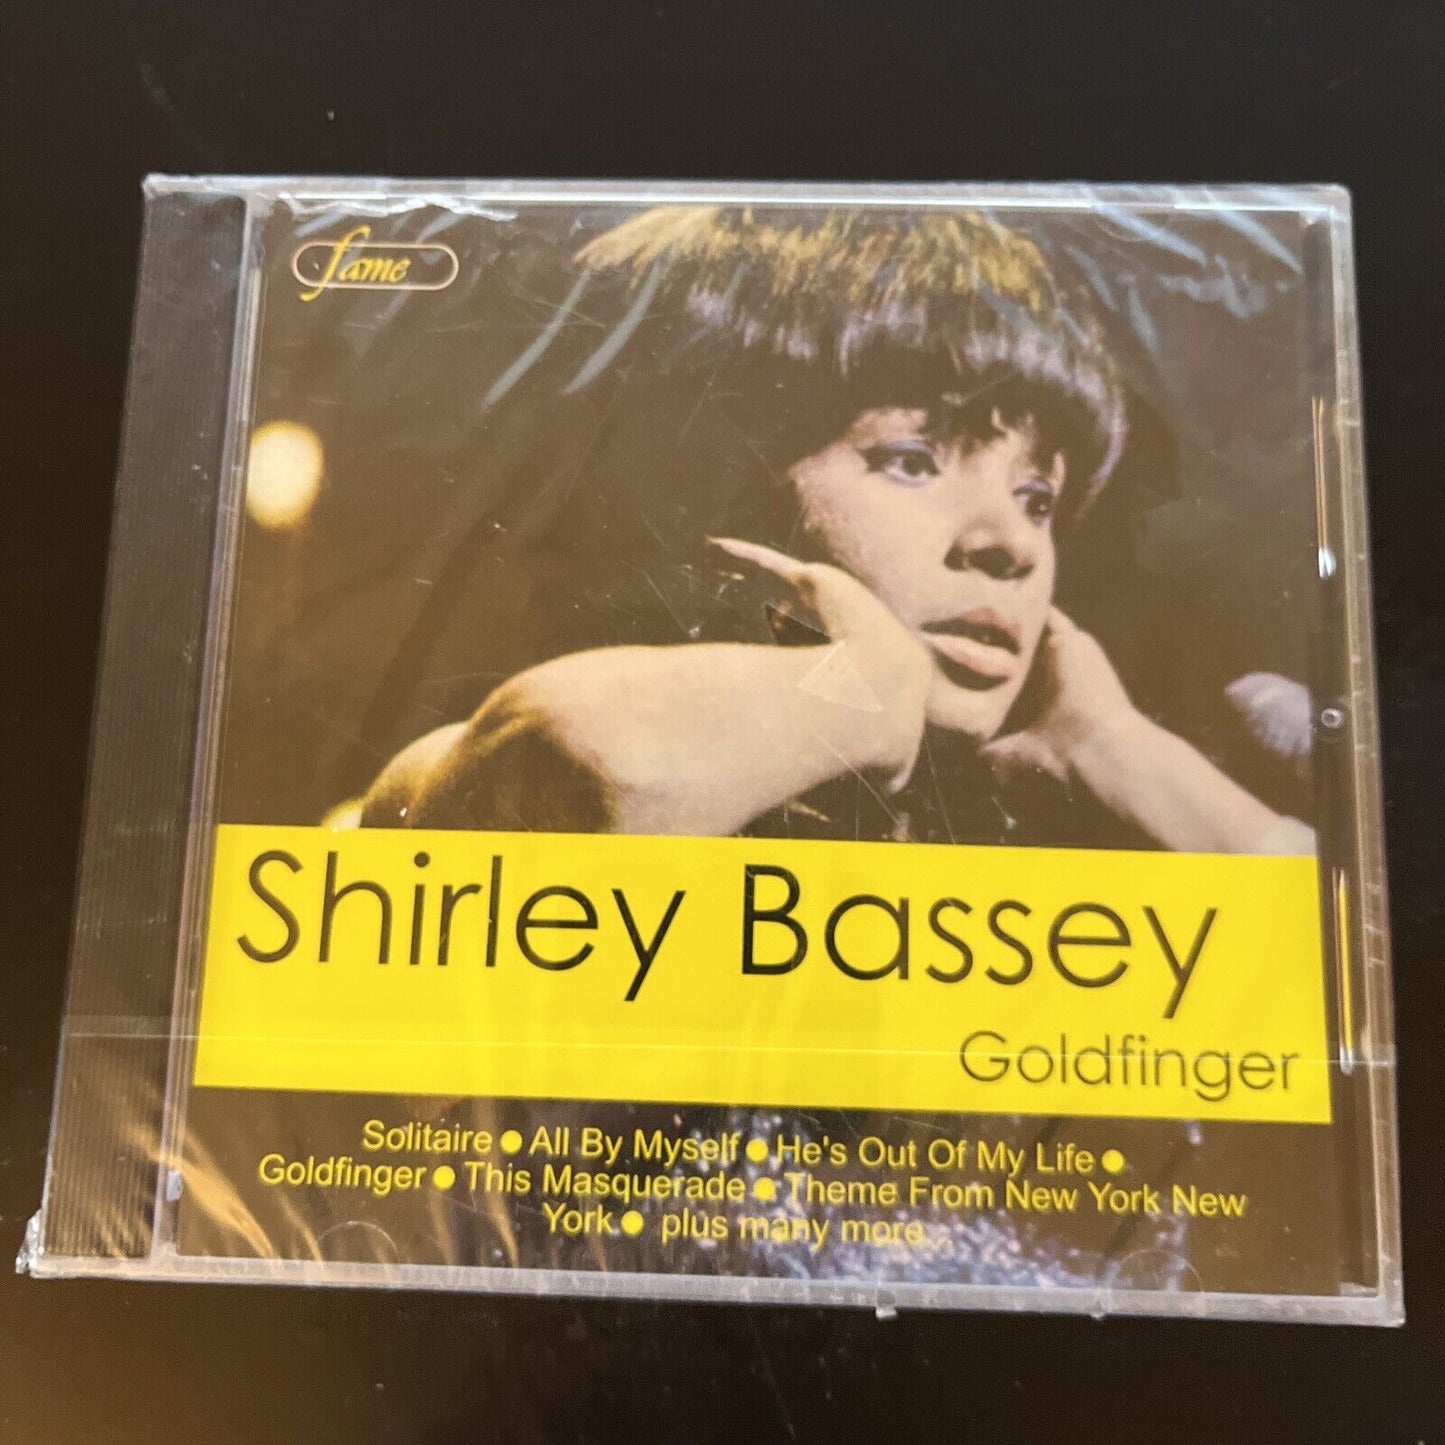 Shirley Bassey - Goldfinger: 20 Great Songs (CD, 1993)